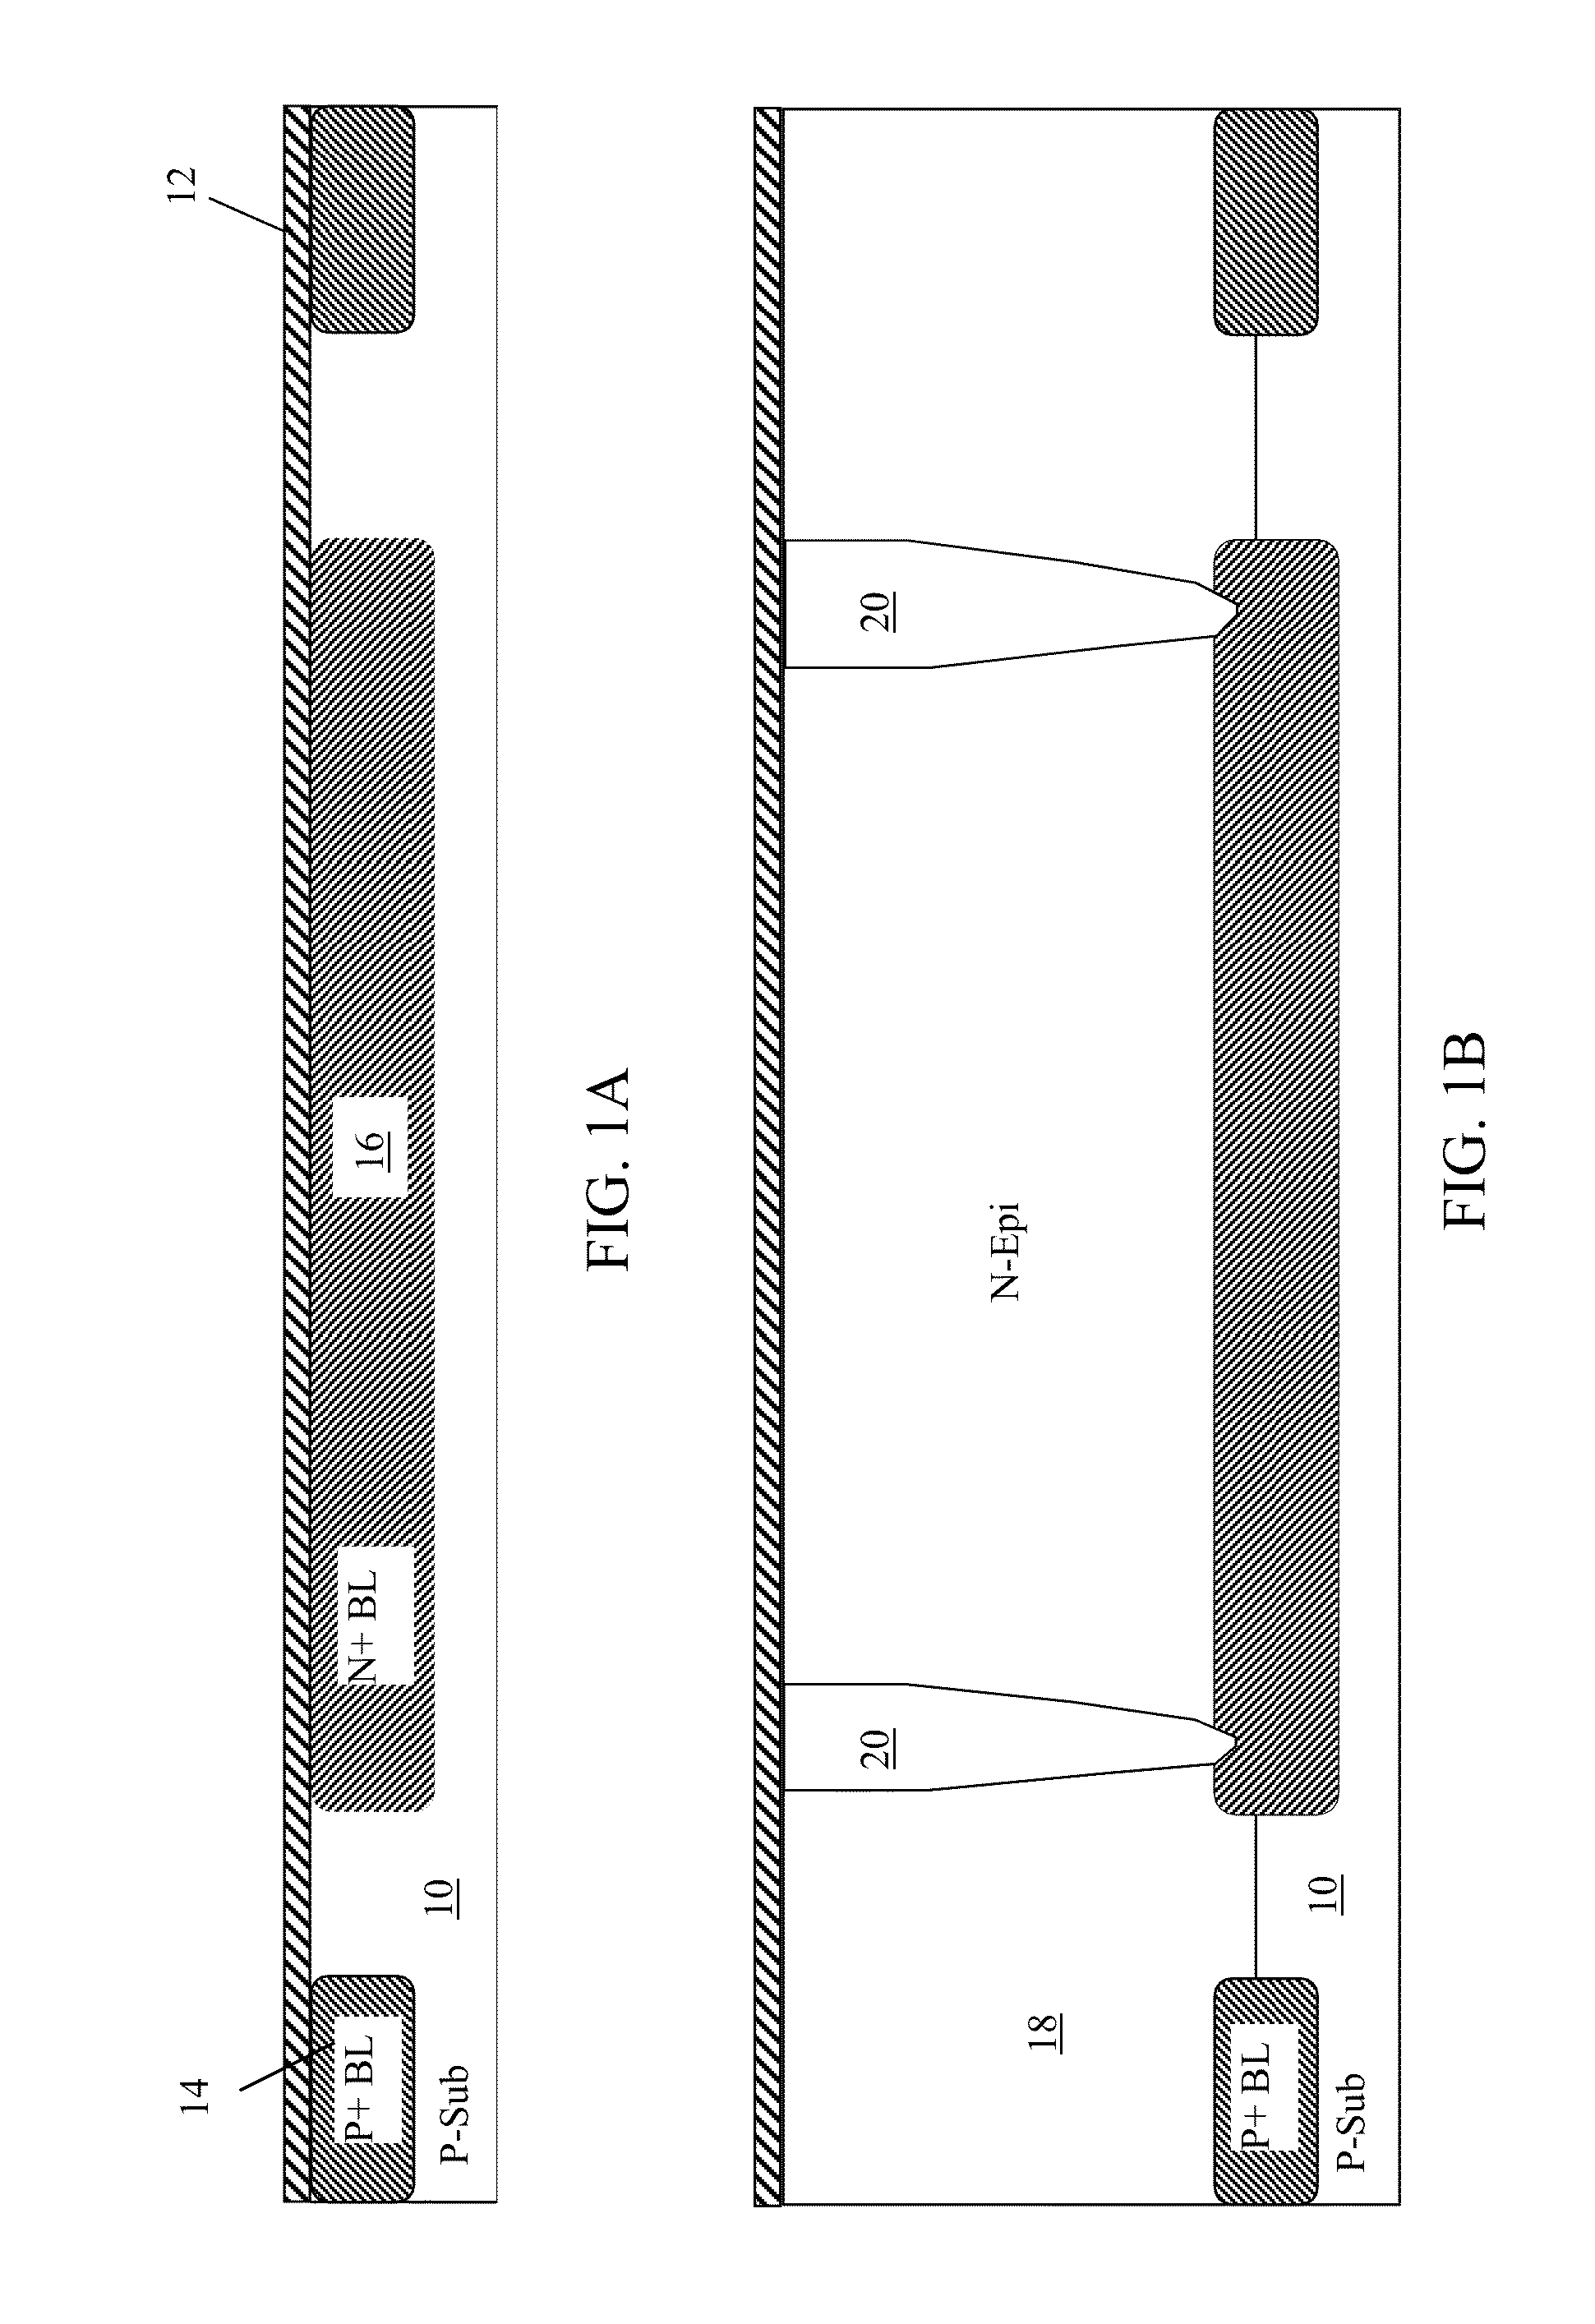 Lateral PNP Bipolar Transistor with Narrow Trench Emitter